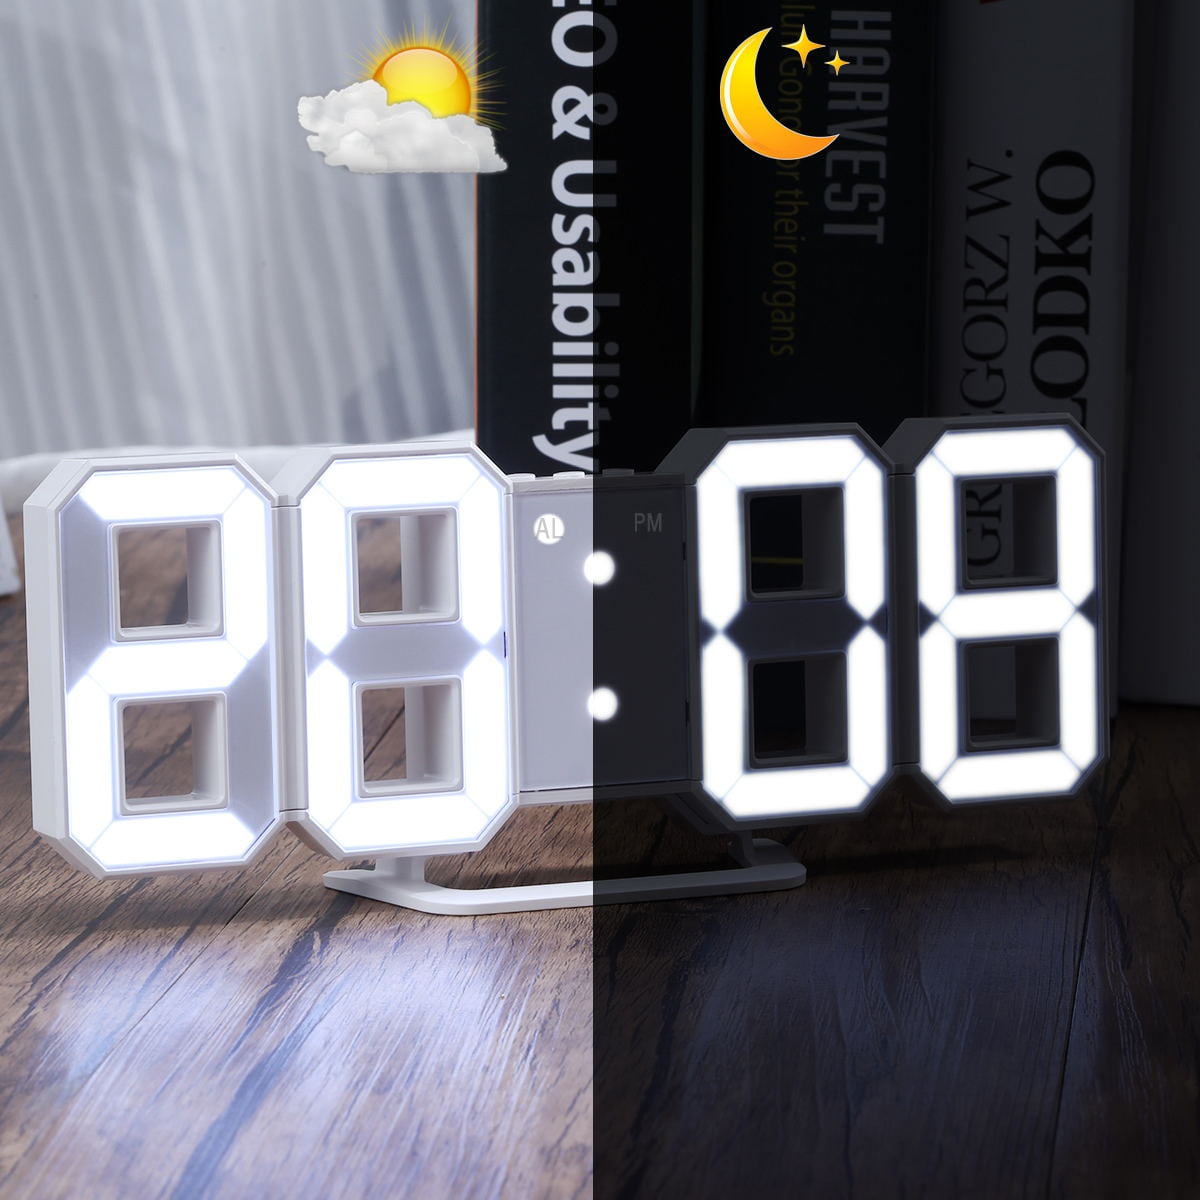 Digita LED Digit 3D Table Wall Clock Dimmer Alarm Snooze Temperature White Moder 